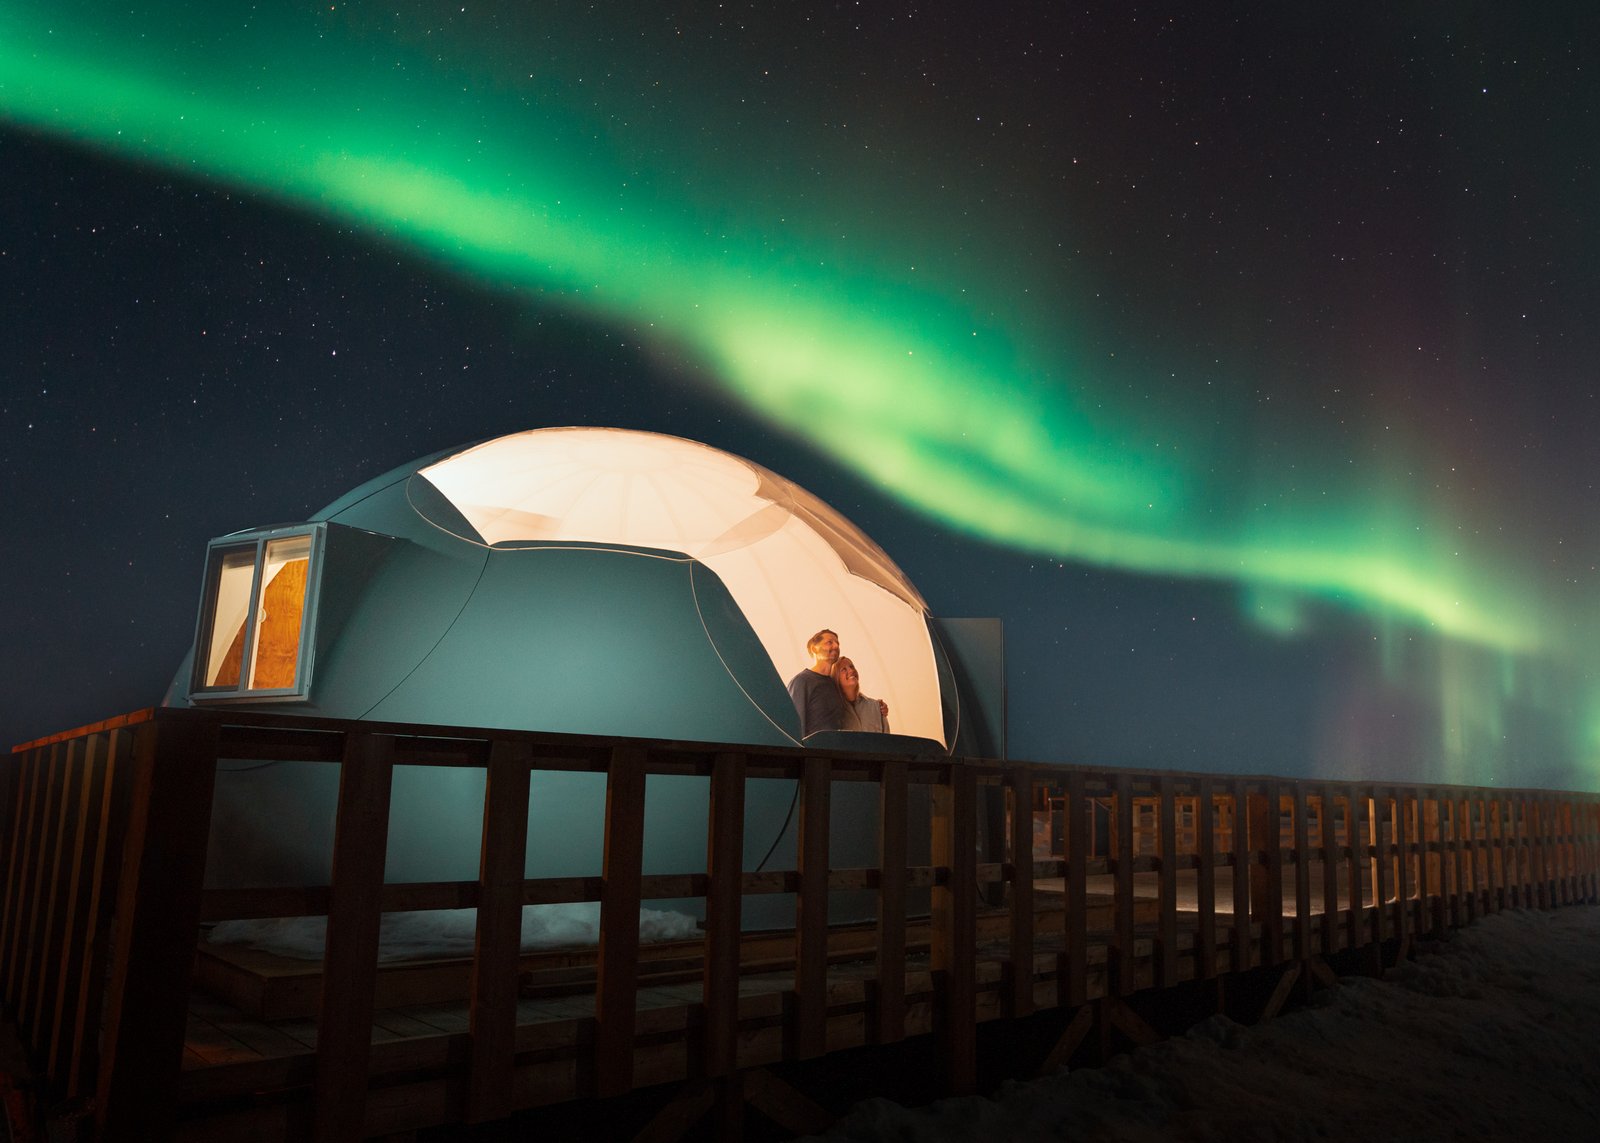 A couple in an embrace looking up at Northern Lights from inside a yurt.